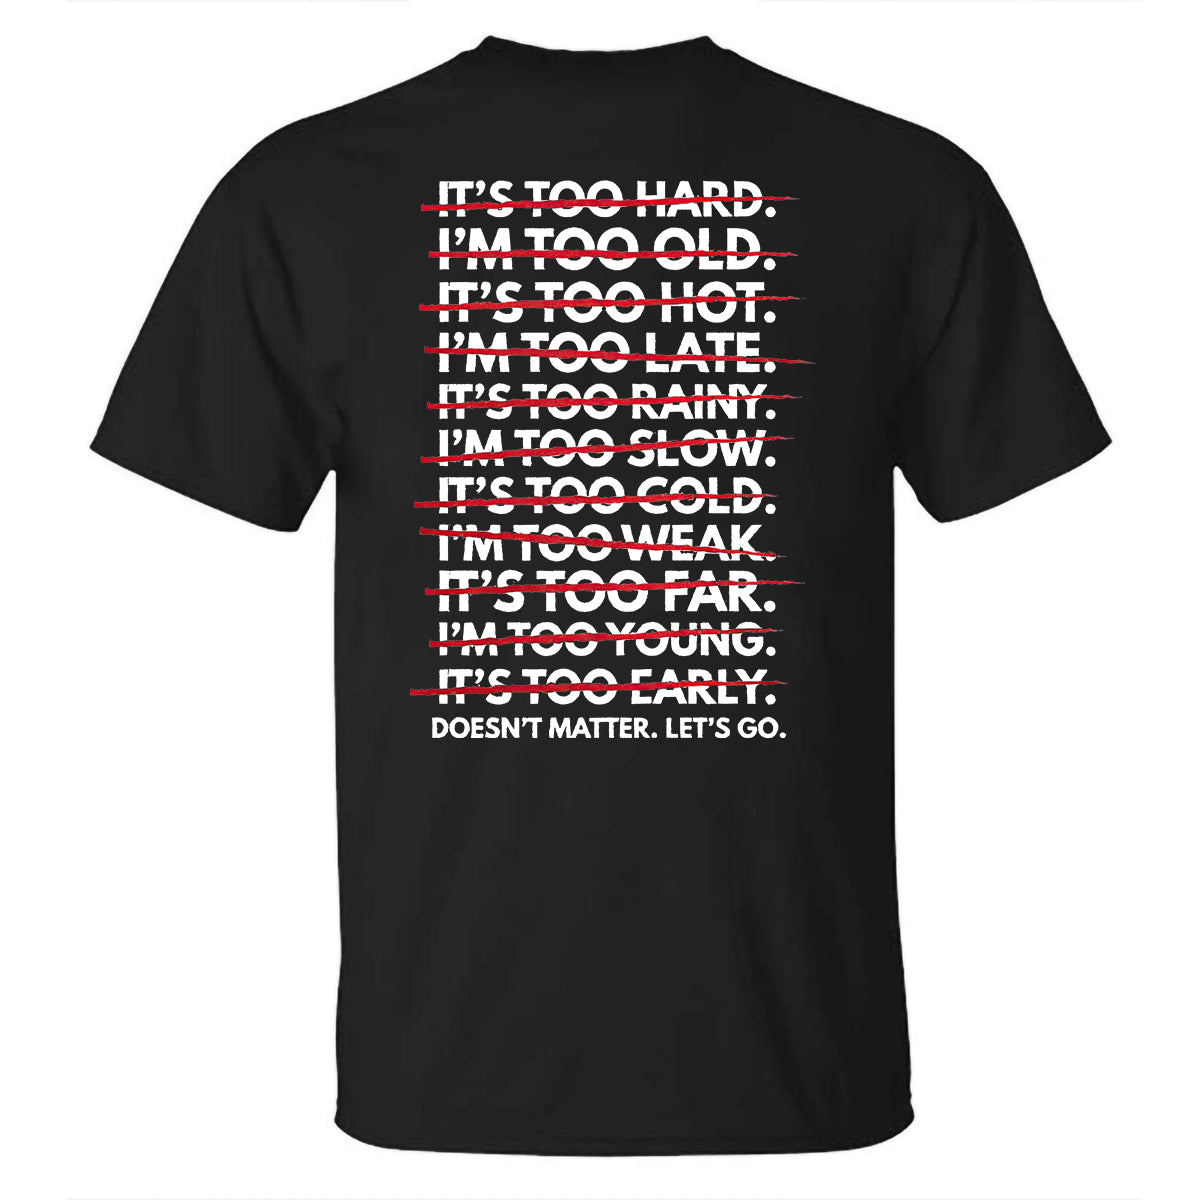 Doesn't Matter Let's Go Printed T-shirt